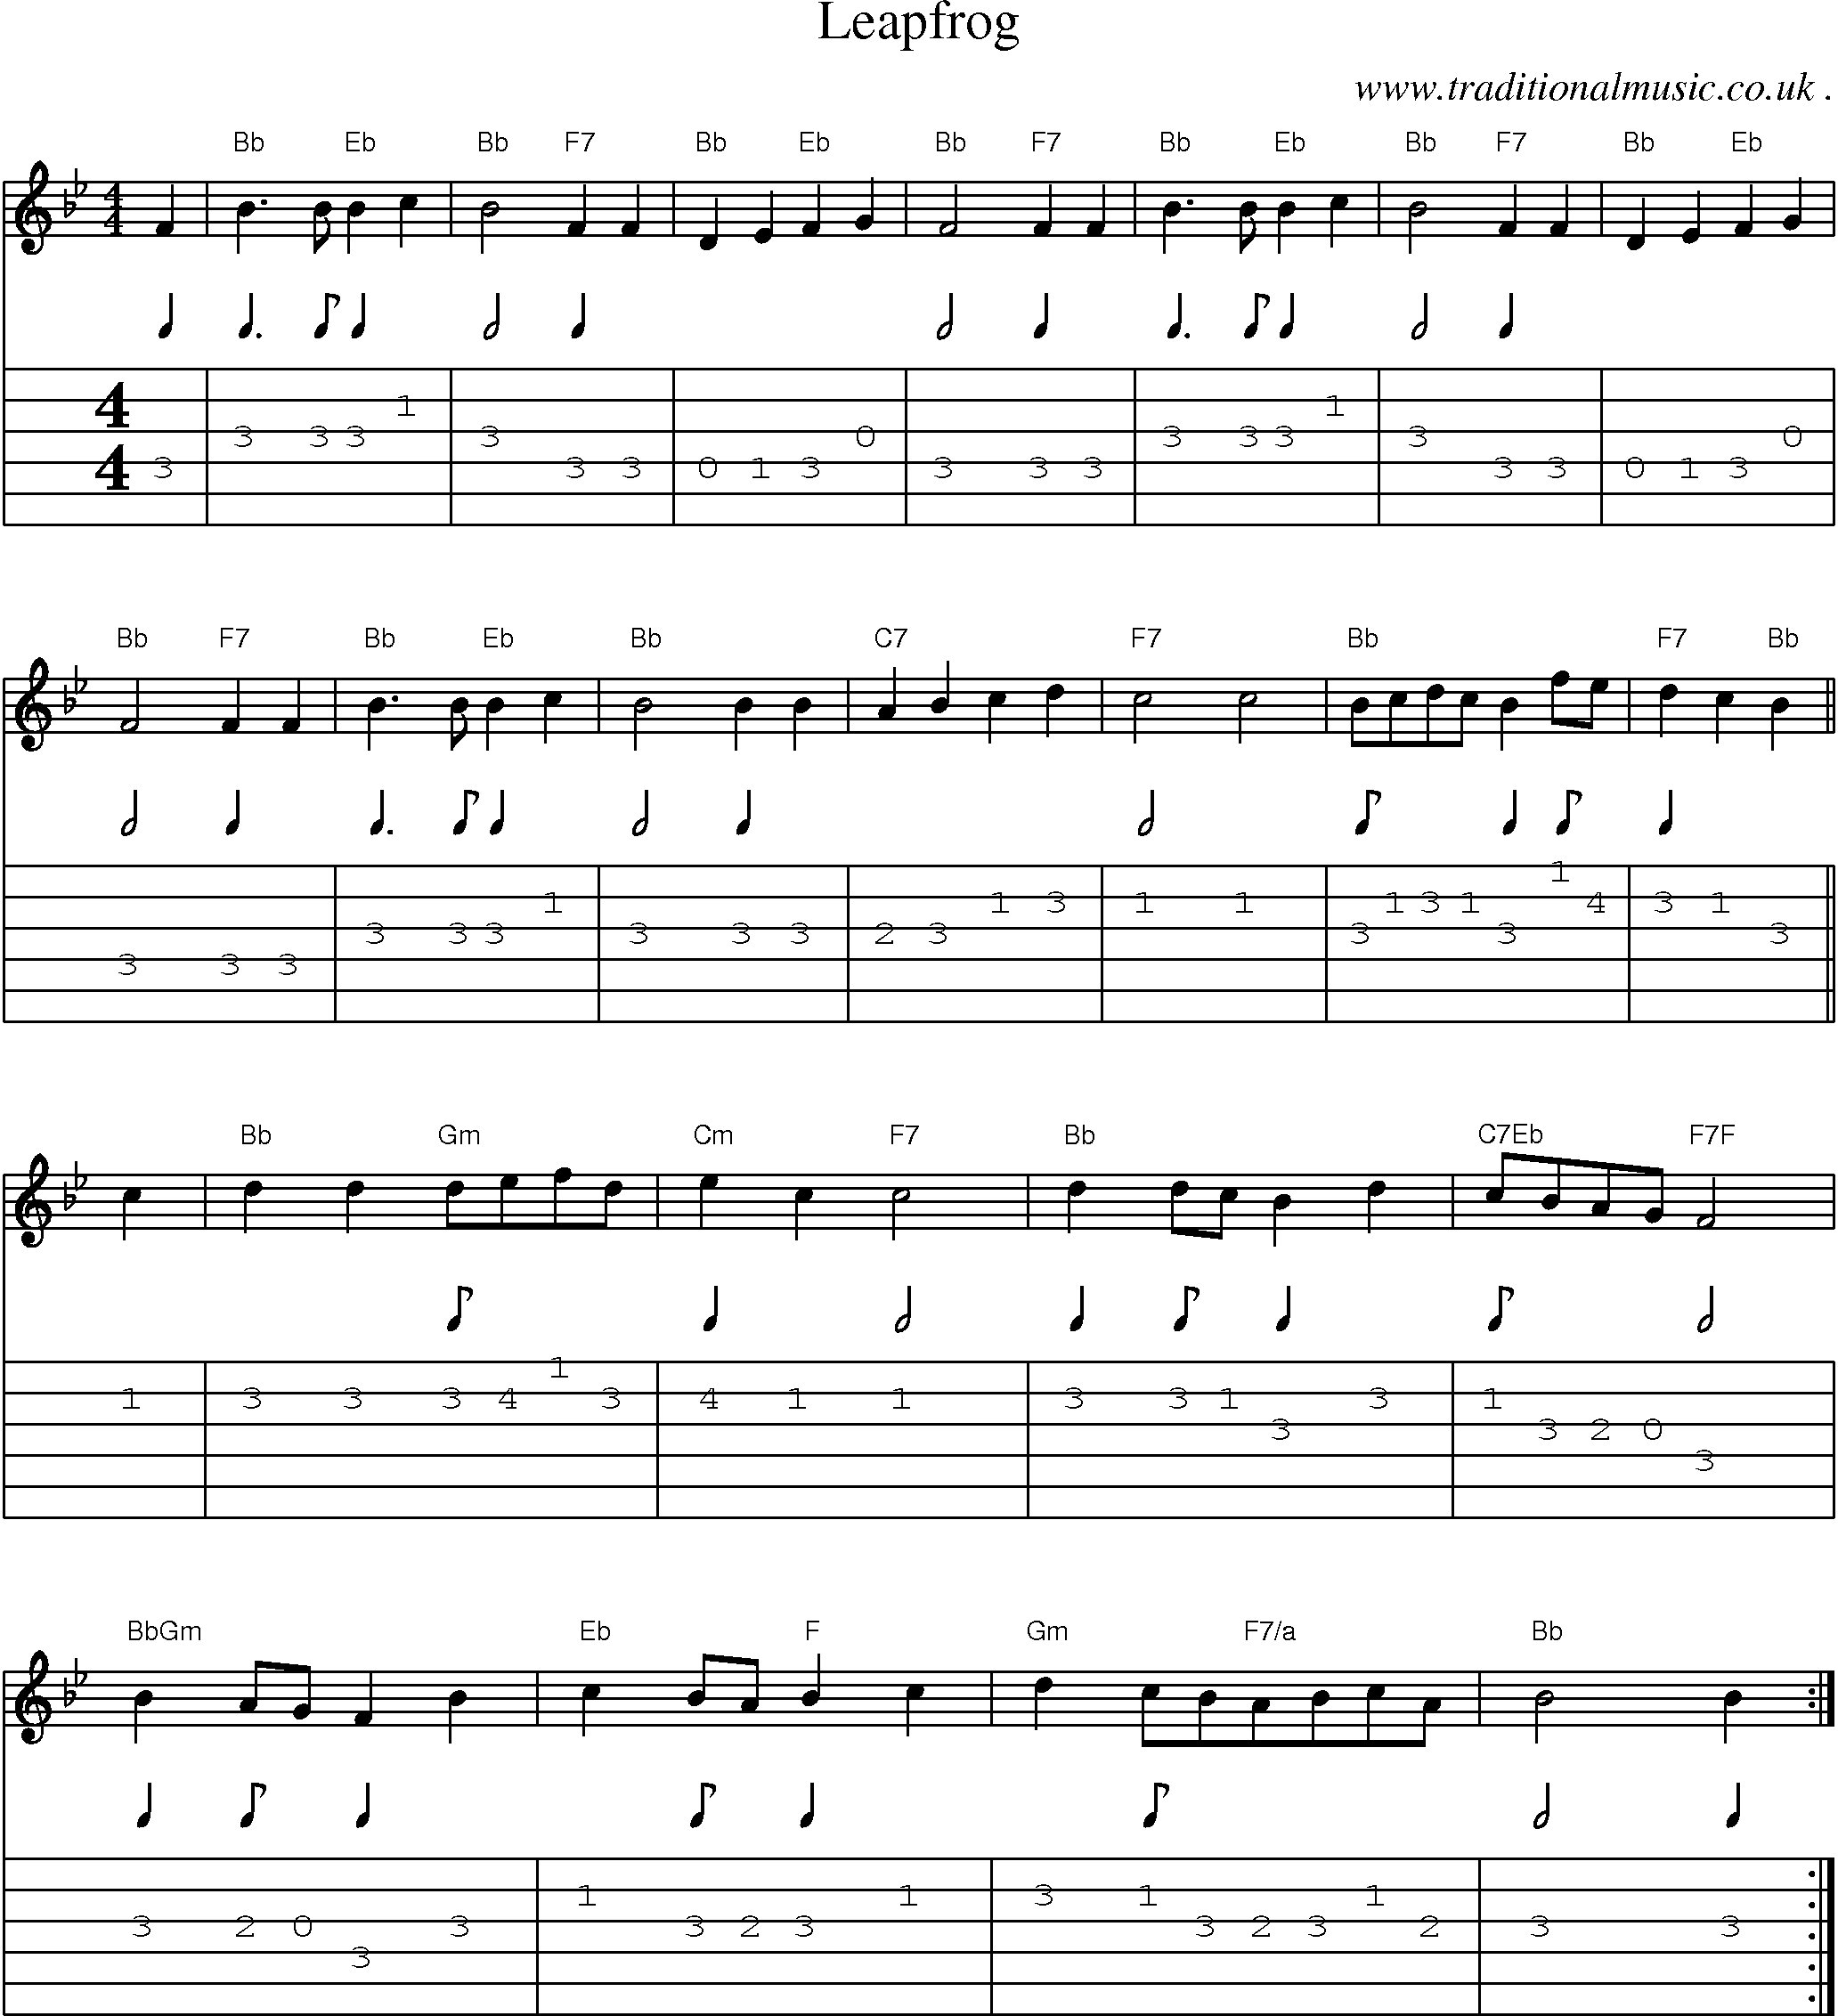 Sheet-Music and Guitar Tabs for Leapfrog